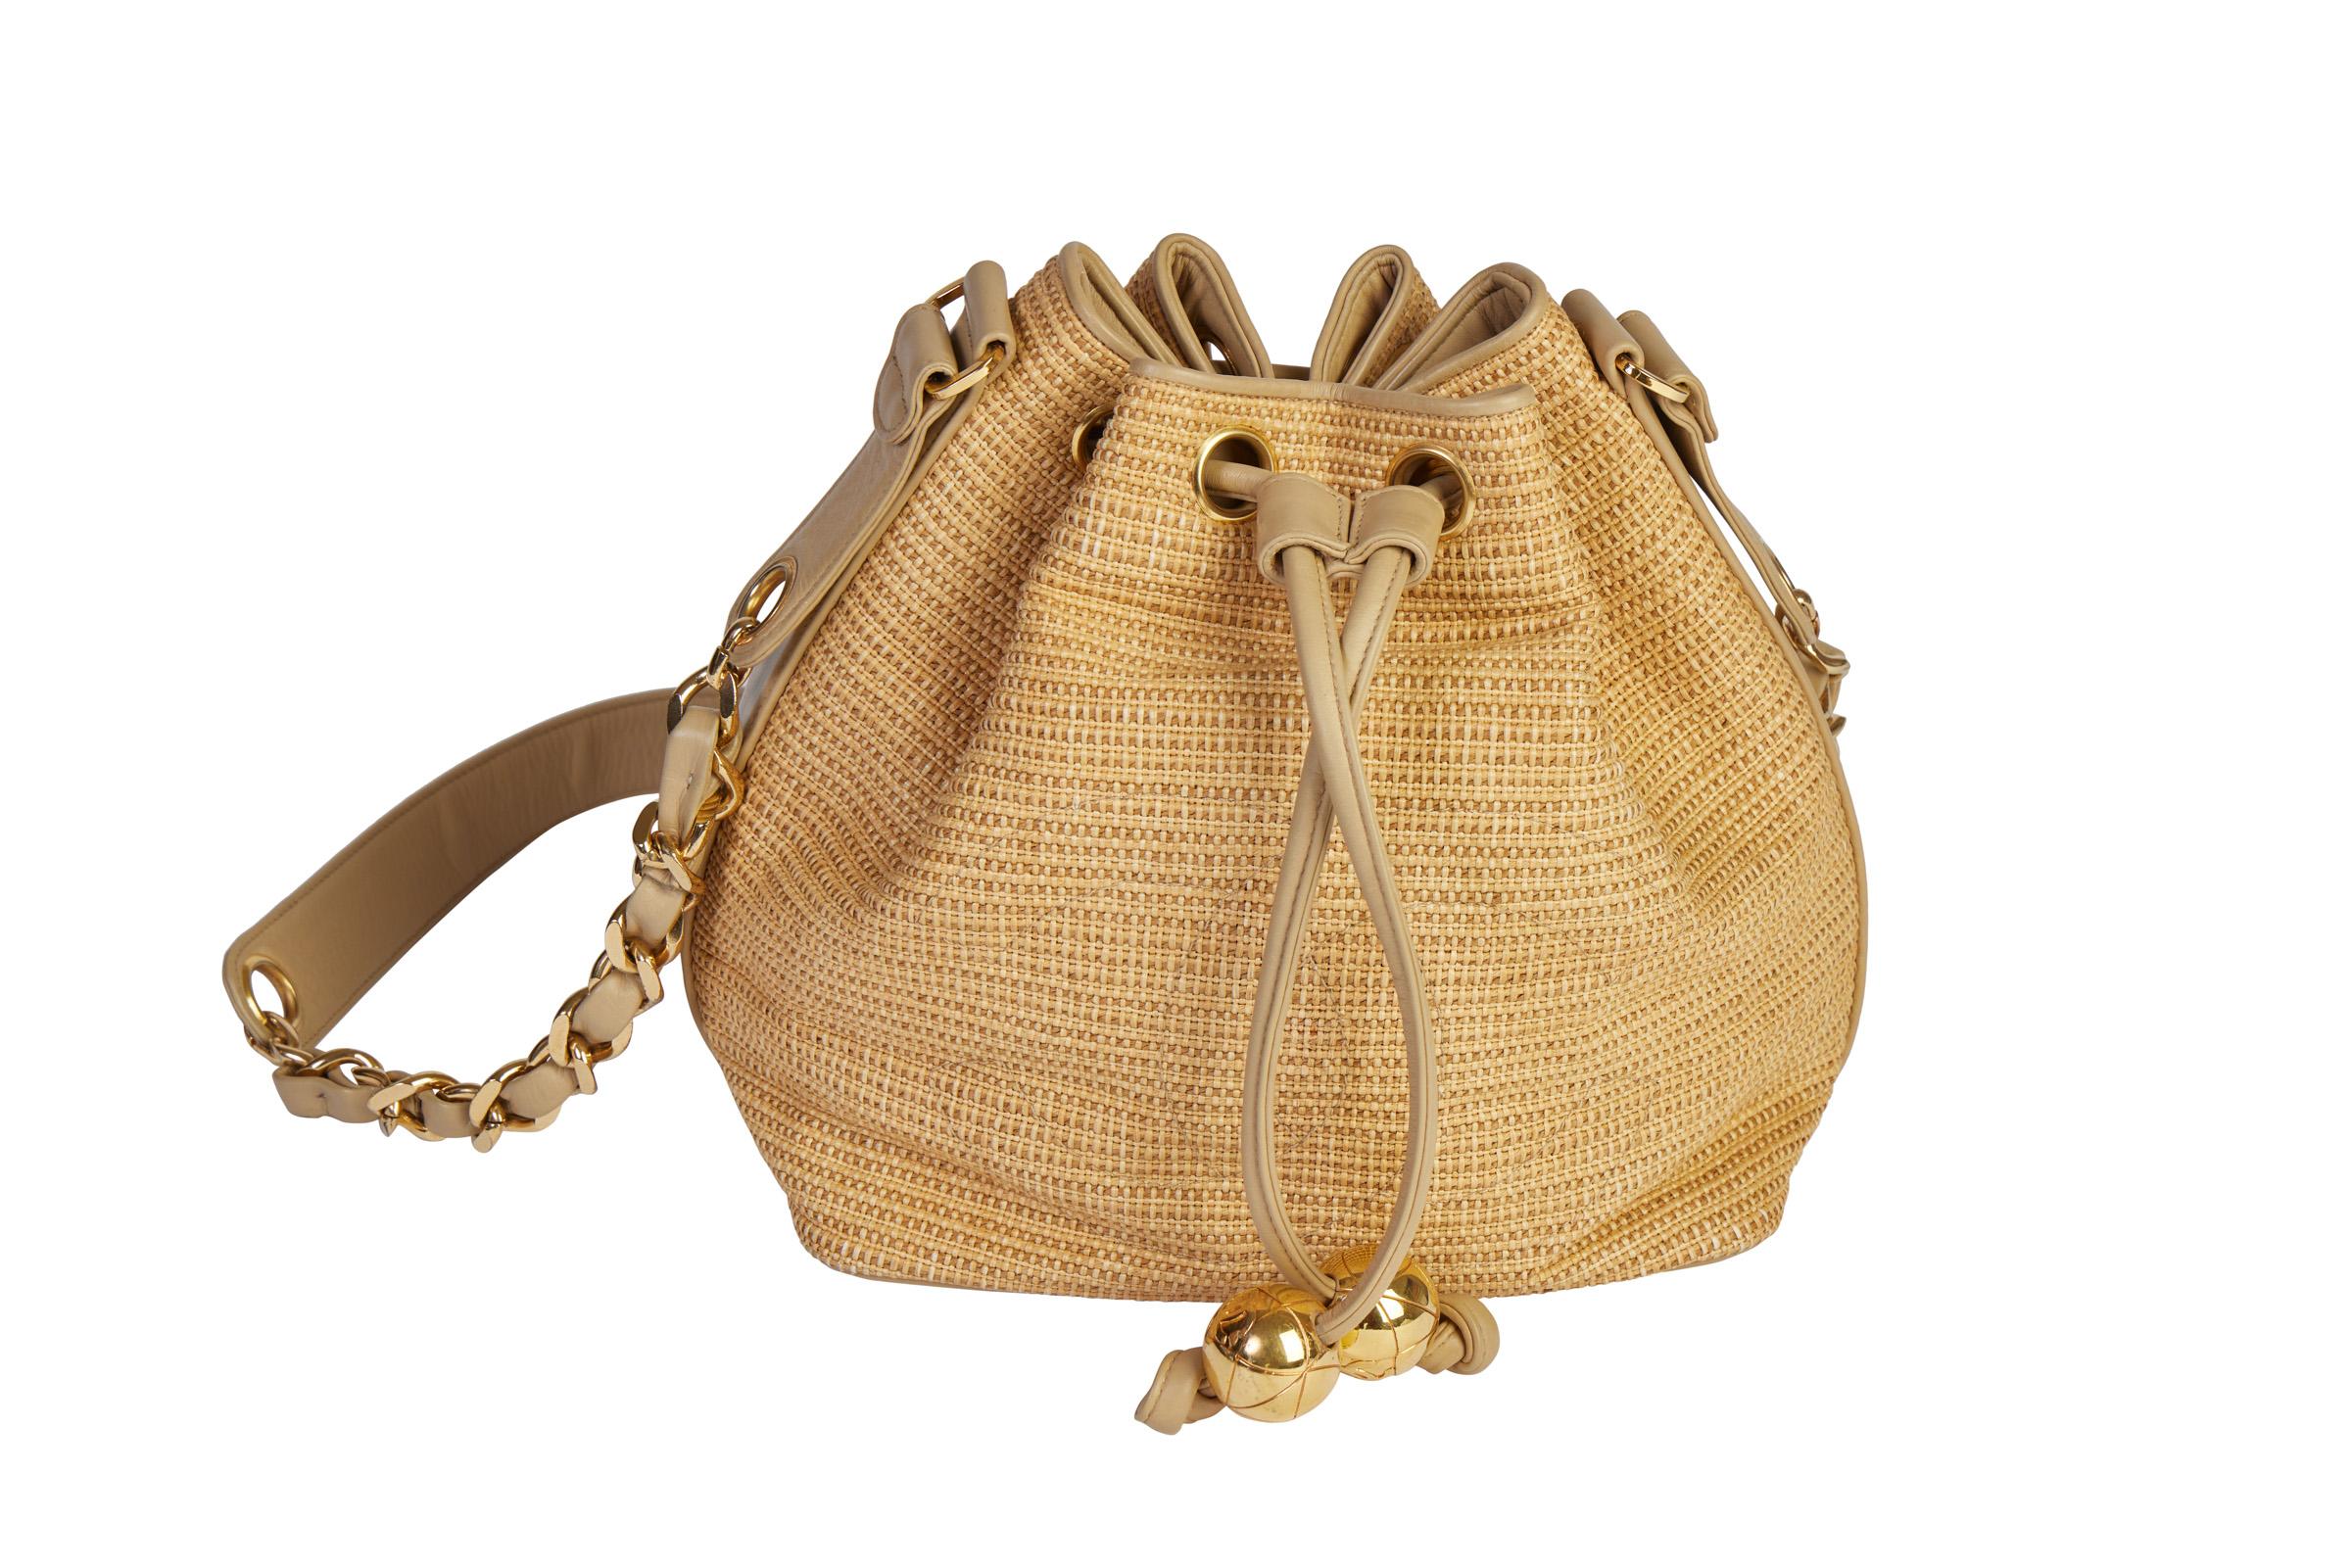 Chanel vintage and collectible straw bucket bag with raffia and beige color leather. Mint condition. Collection 1991. Shoulder strap 20